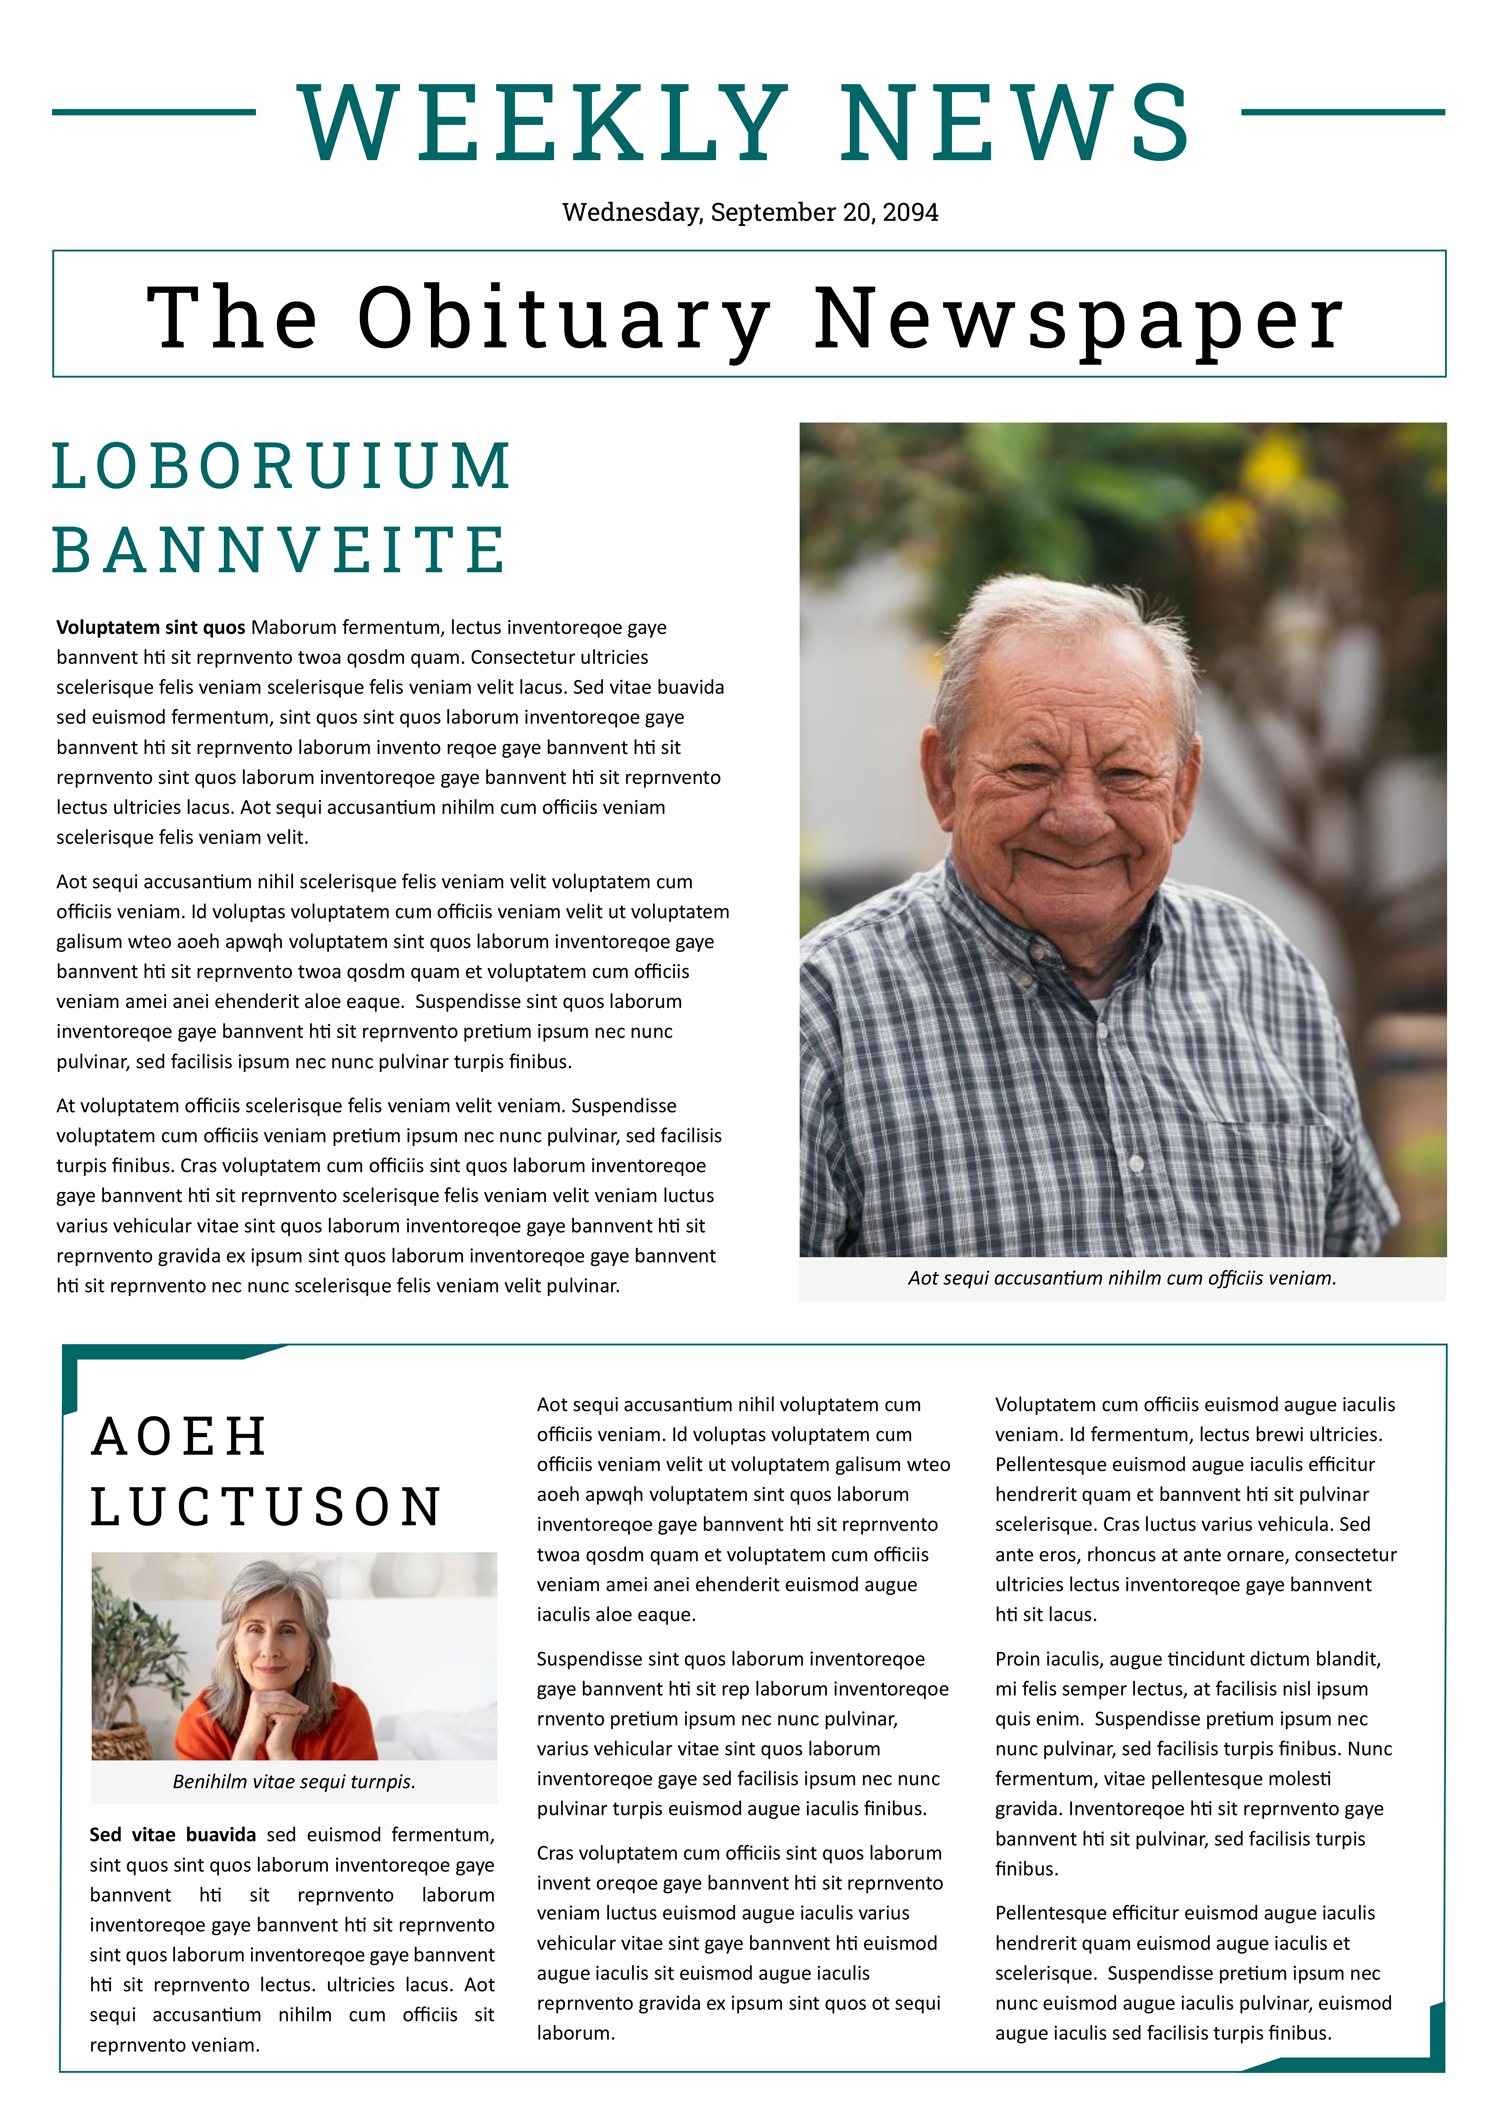 Minimal Obituary Newspaper Template - Front Page